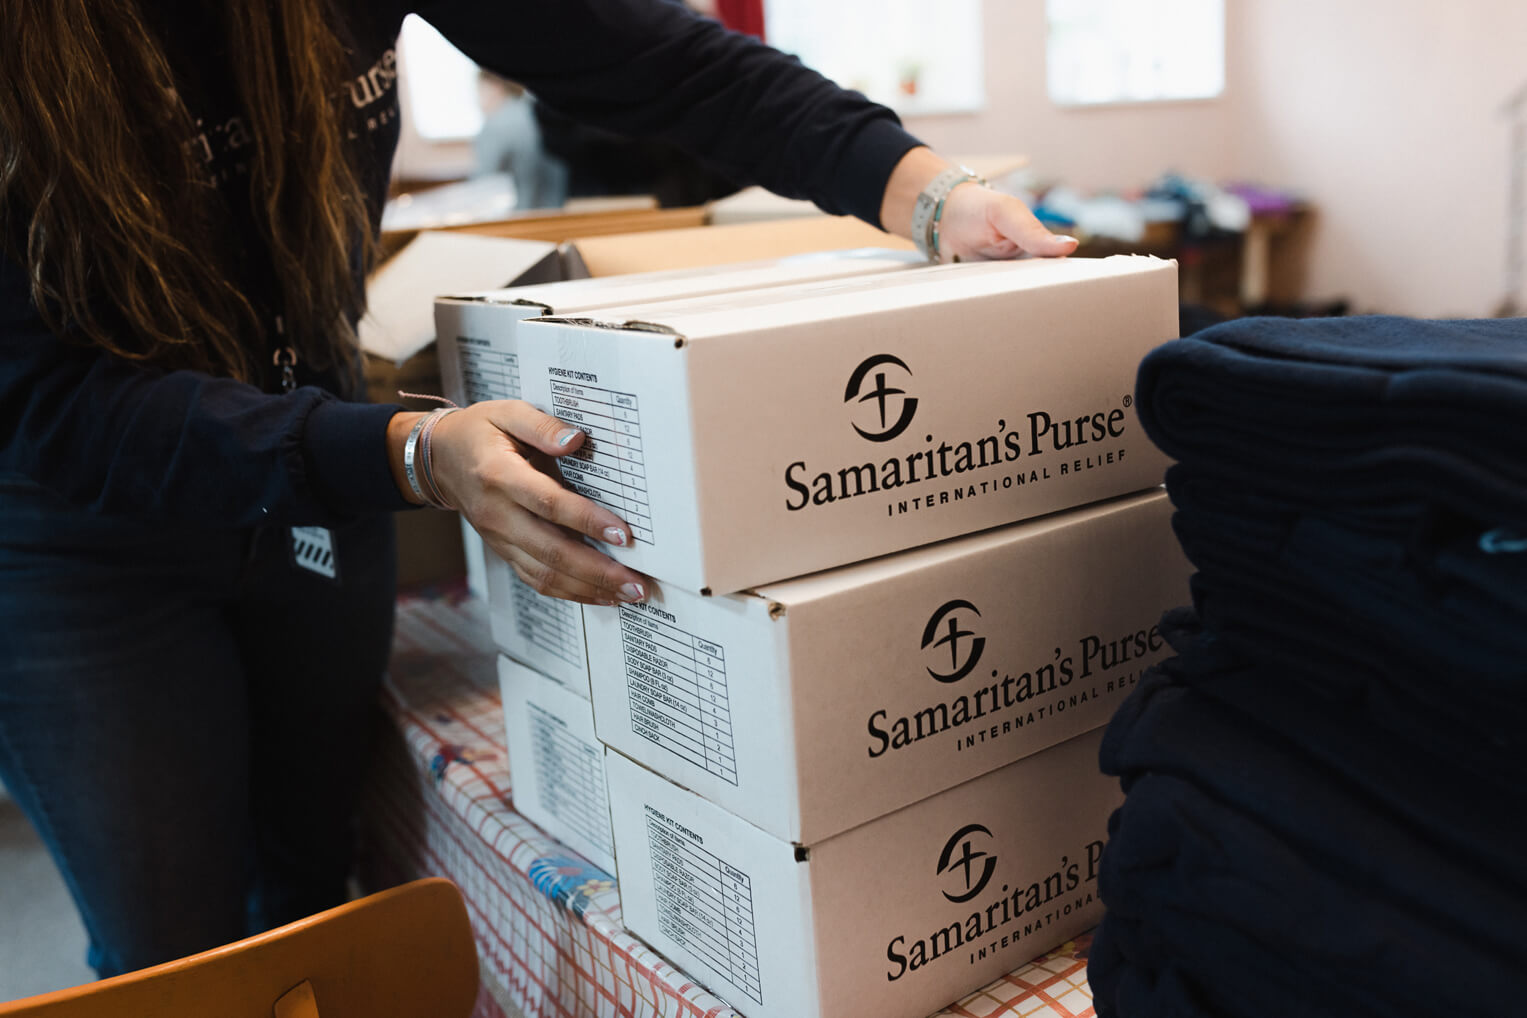 Samaritan's Purse staff, in partnership with local churches in Ukraine, are distributing food, hygiene, kits, clothing, and other items desperately needed by those fleeing violence in Ukraine.